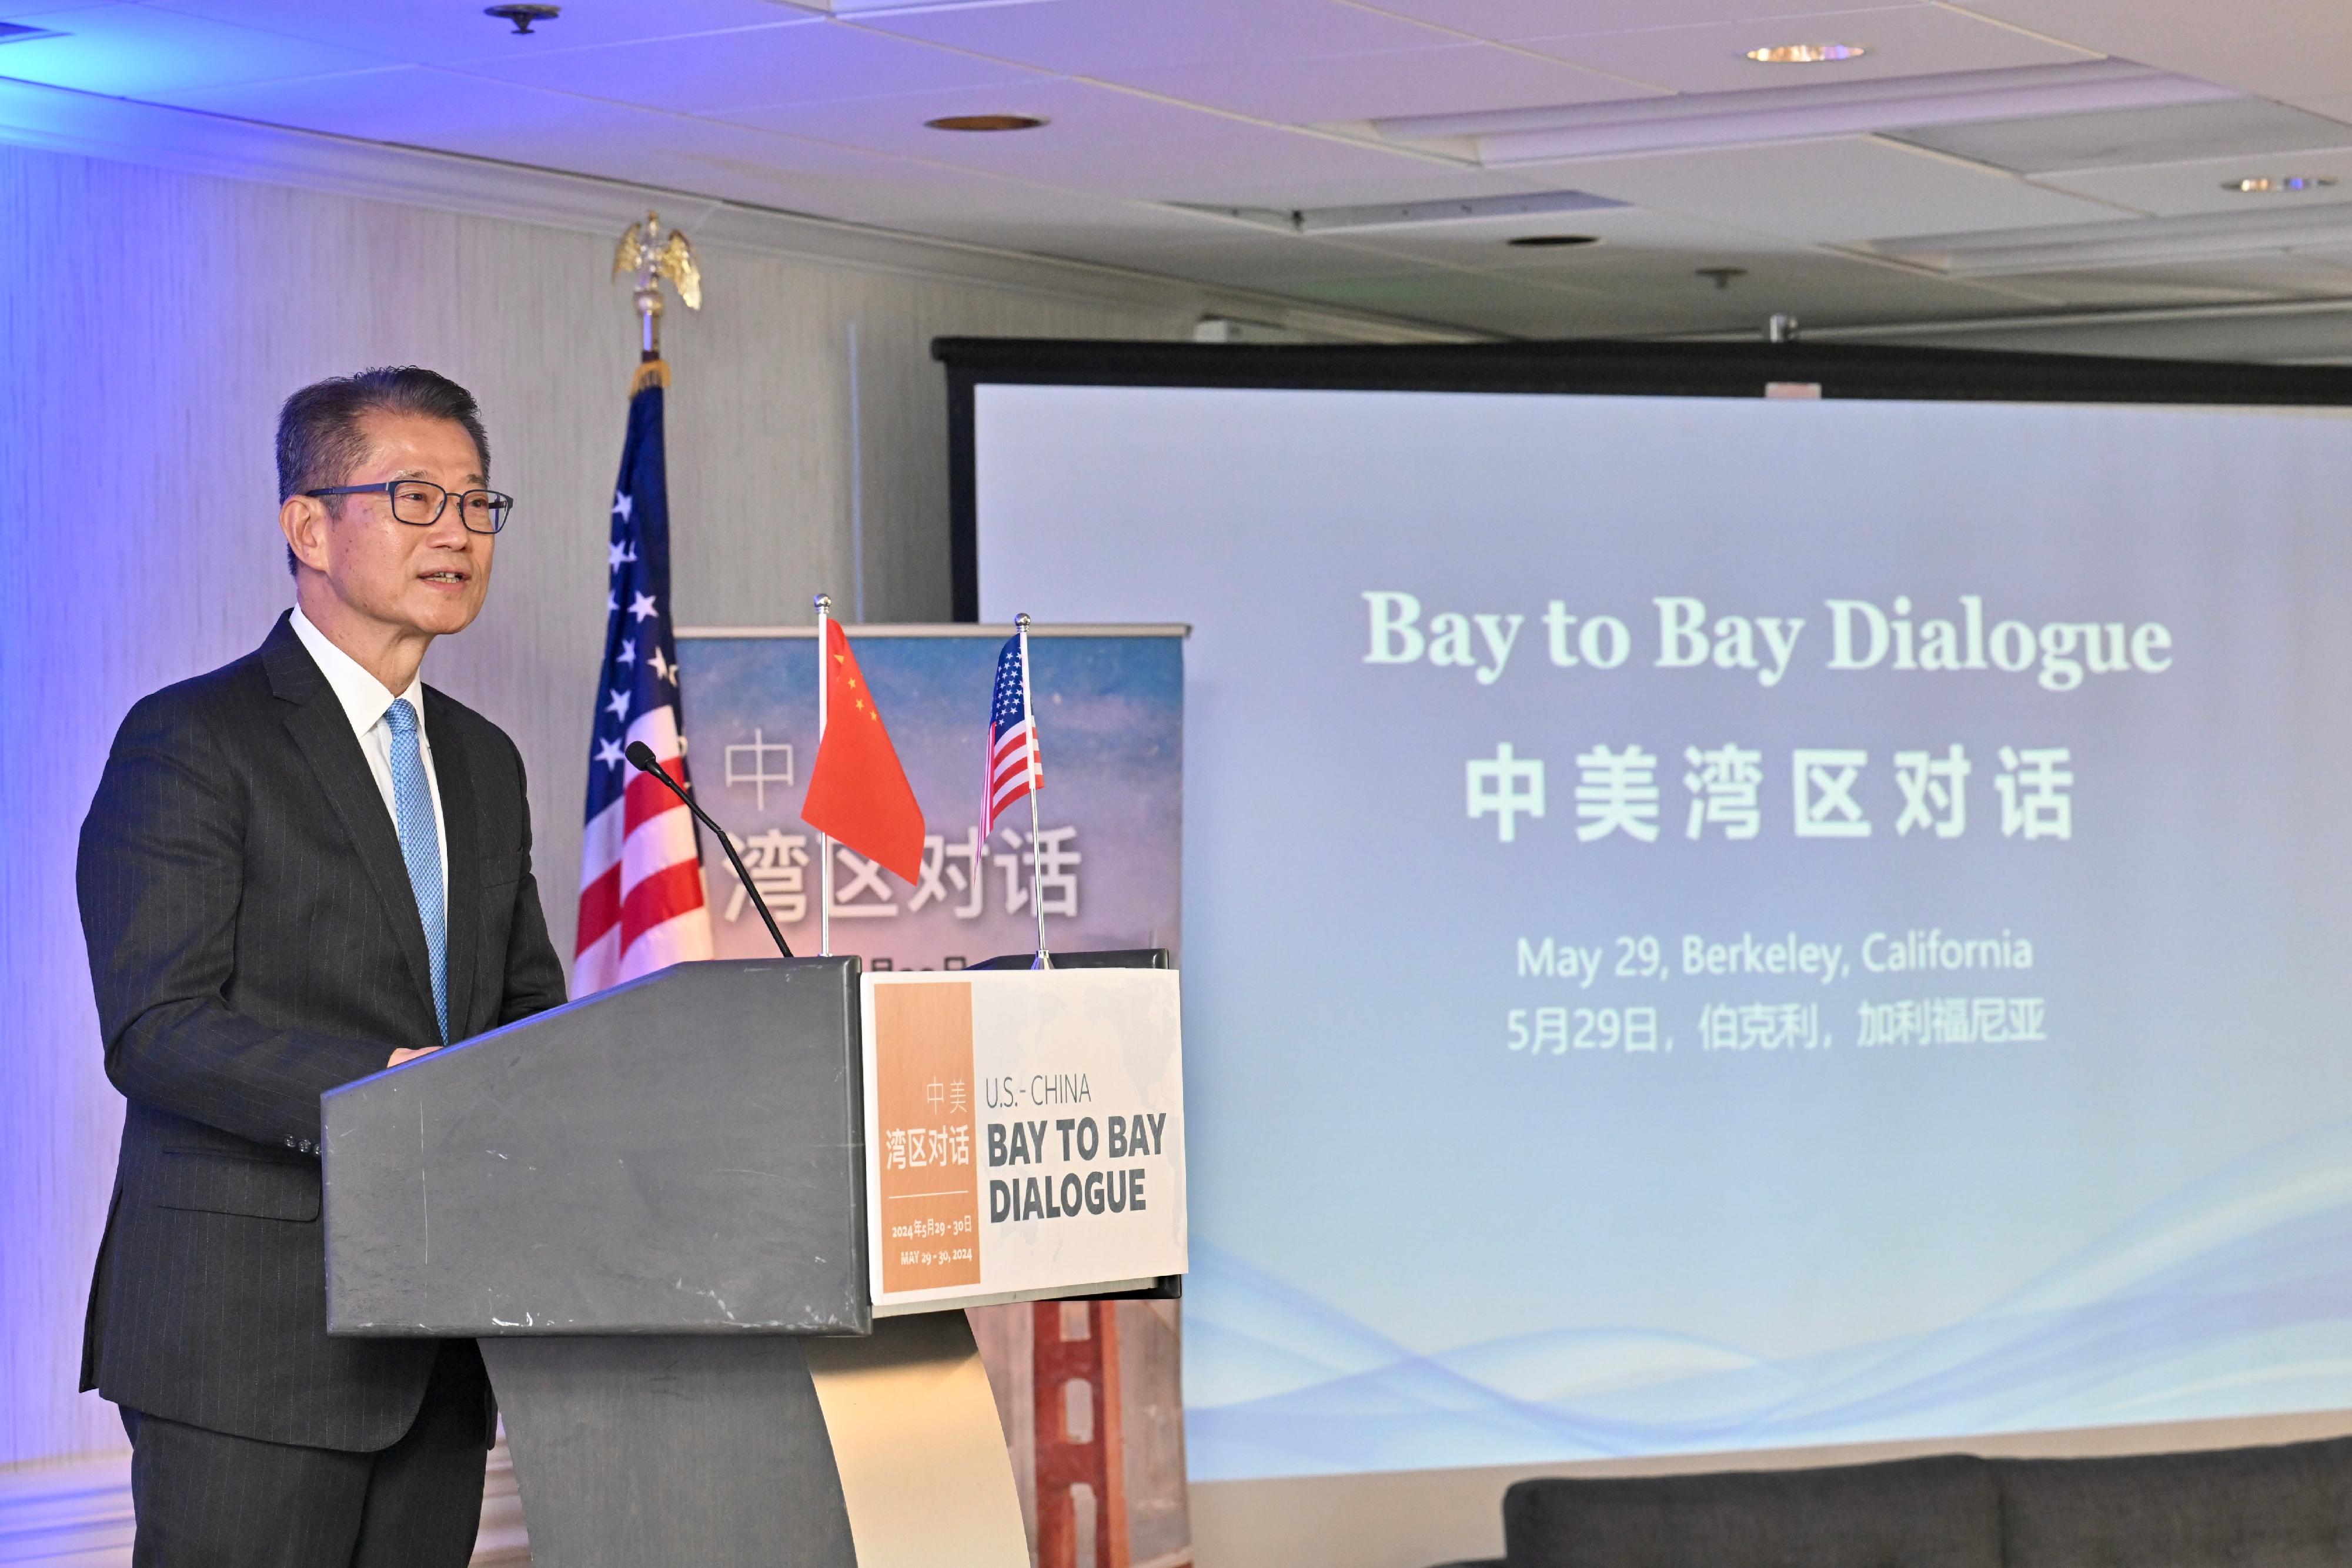 The Financial Secretary, Mr Paul Chan, leads a delegation from the Hong Kong Special Administrative Region Government to attend the Bay to Bay Dialogue between the California Bay Area and the Guangdong-Hong Kong-Macao Greater Bay Area in Berkeley in California, the United States on May 29 (California time). Photo shows Mr Chan delivering a speech at its High-level Remarks and Announcement session.